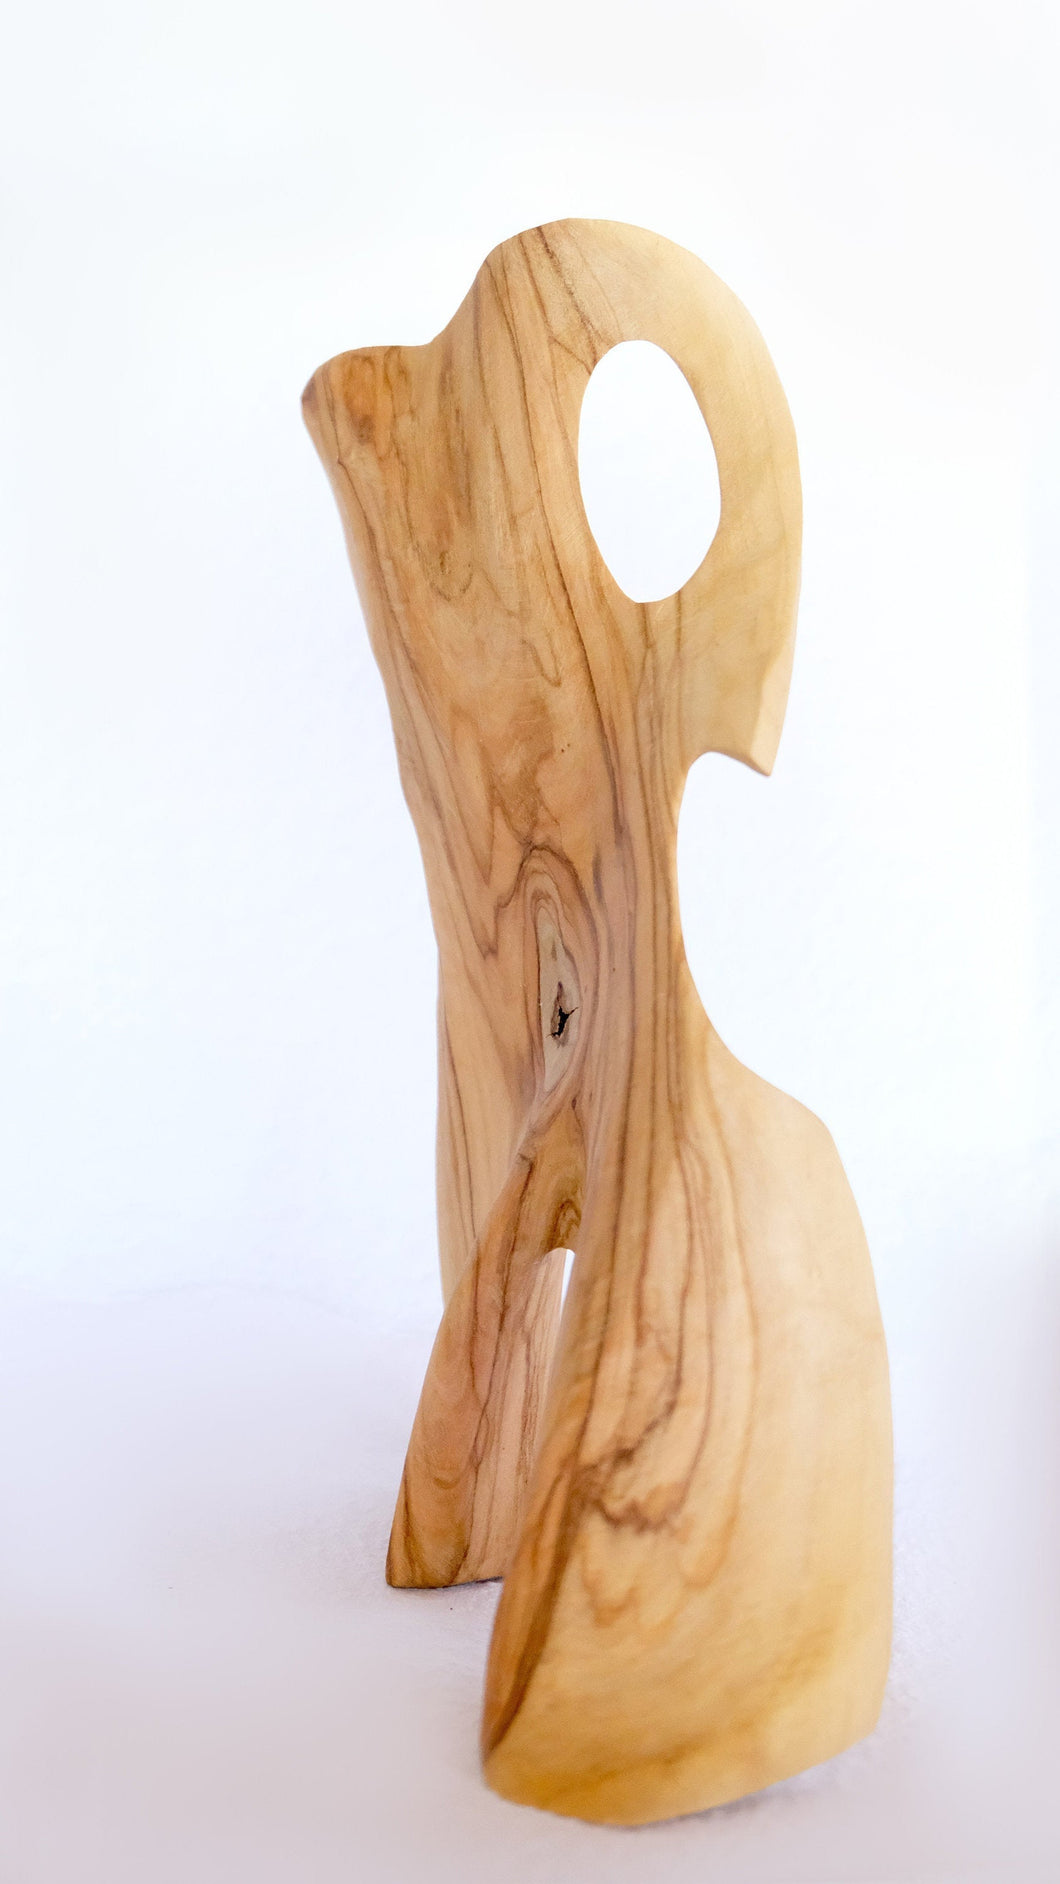 Mini Handcrafted Sculpture from Reclaimed Olive Wood